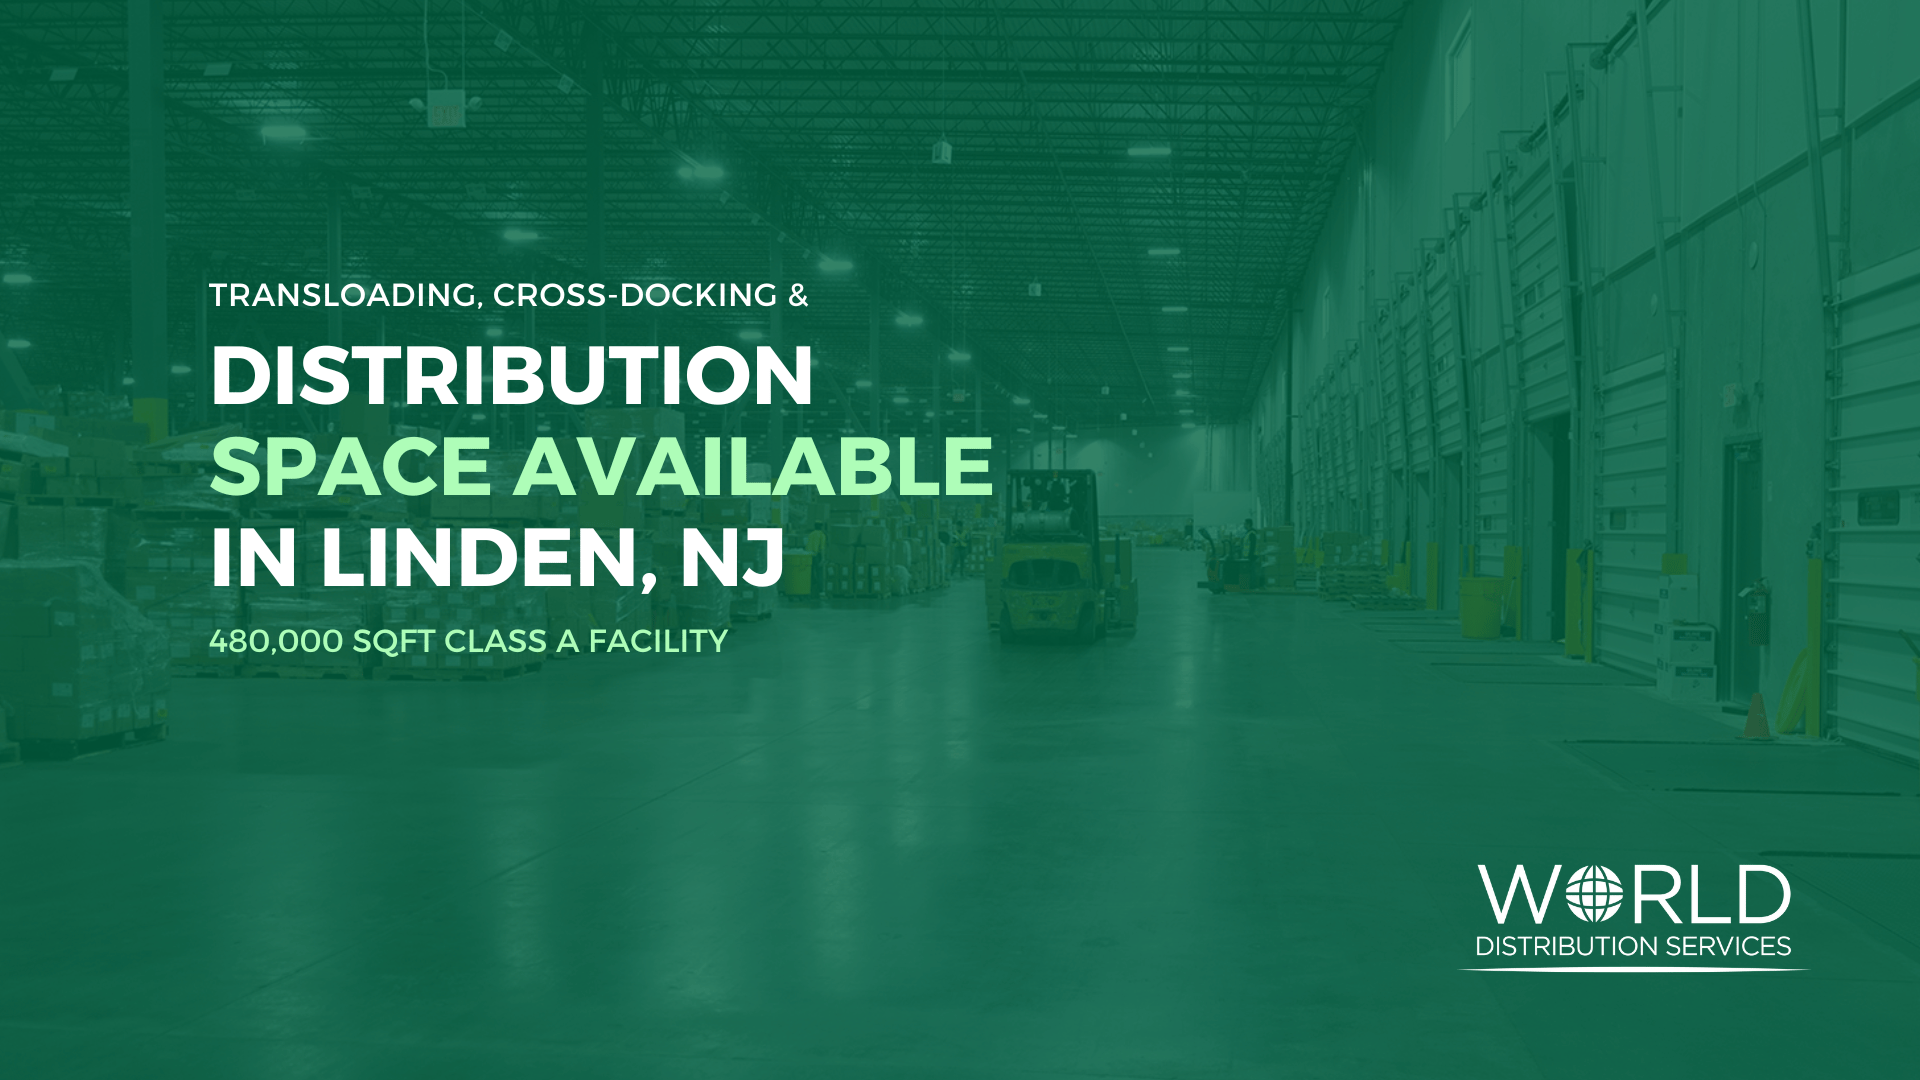 WDS announces distribution capacity available in Linden, NJ - 480,000 sq ft Class A facility.